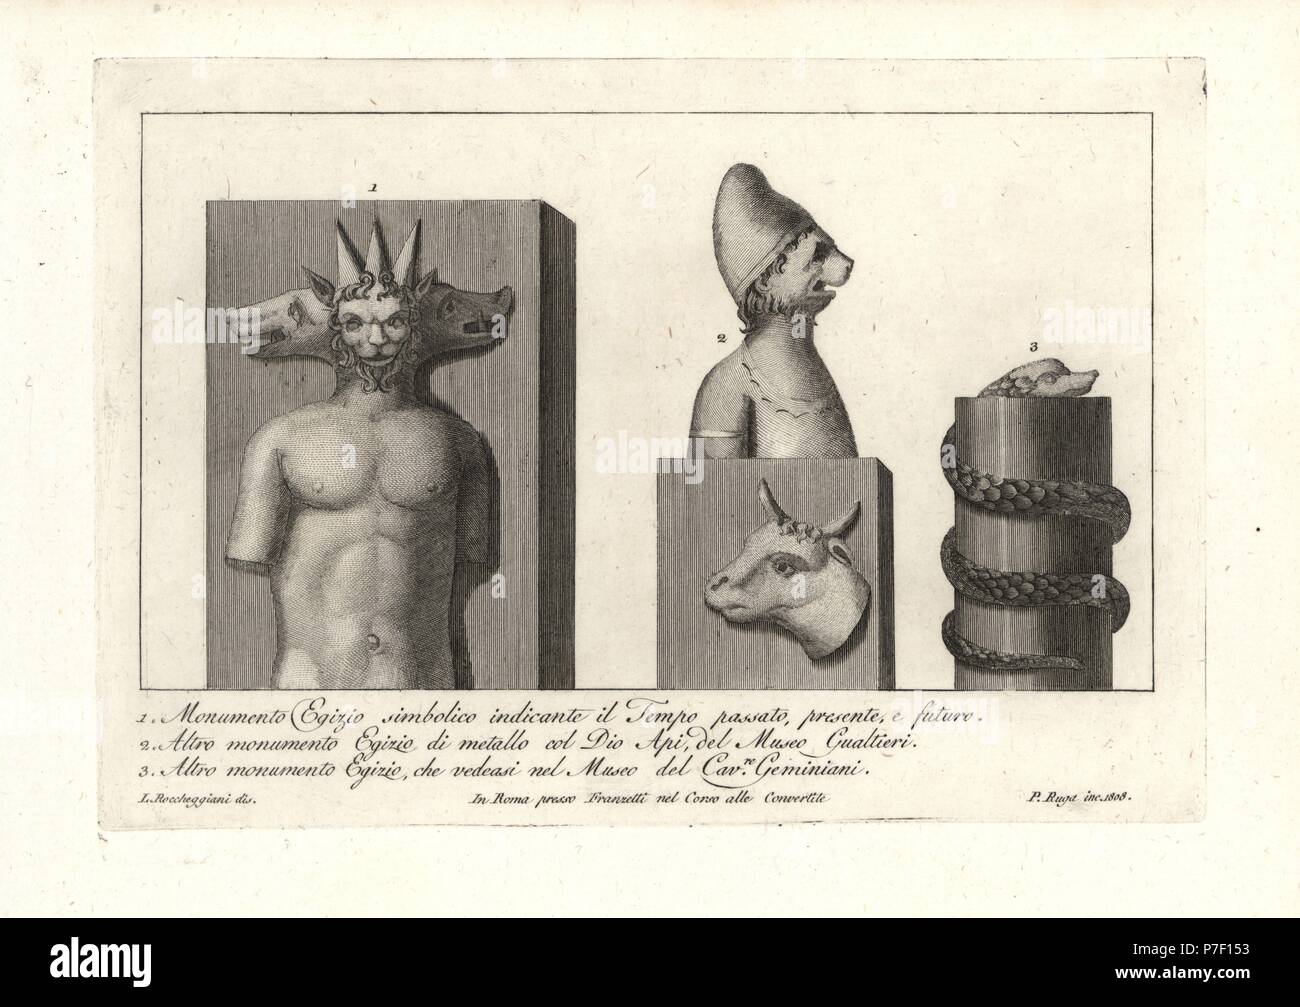 Egyptian three-headed monument symbolizing the past, present and future 1, Egyptian monument in metal to the god Apis from the Museum Gualtieri 2, and another Egyptian monument with coiled snake in the Museum of Cavallero Geminiani 3. Copperplate engraving by Pietro Ruga after an illustration by Lorenzo Rocceggiani from his own 100 Plates of Costumes Religious, Civil and Military of the Ancient Egyptians, Etruscans, Greeks and Romans, Franzetti, Rome, 1802. Stock Photo